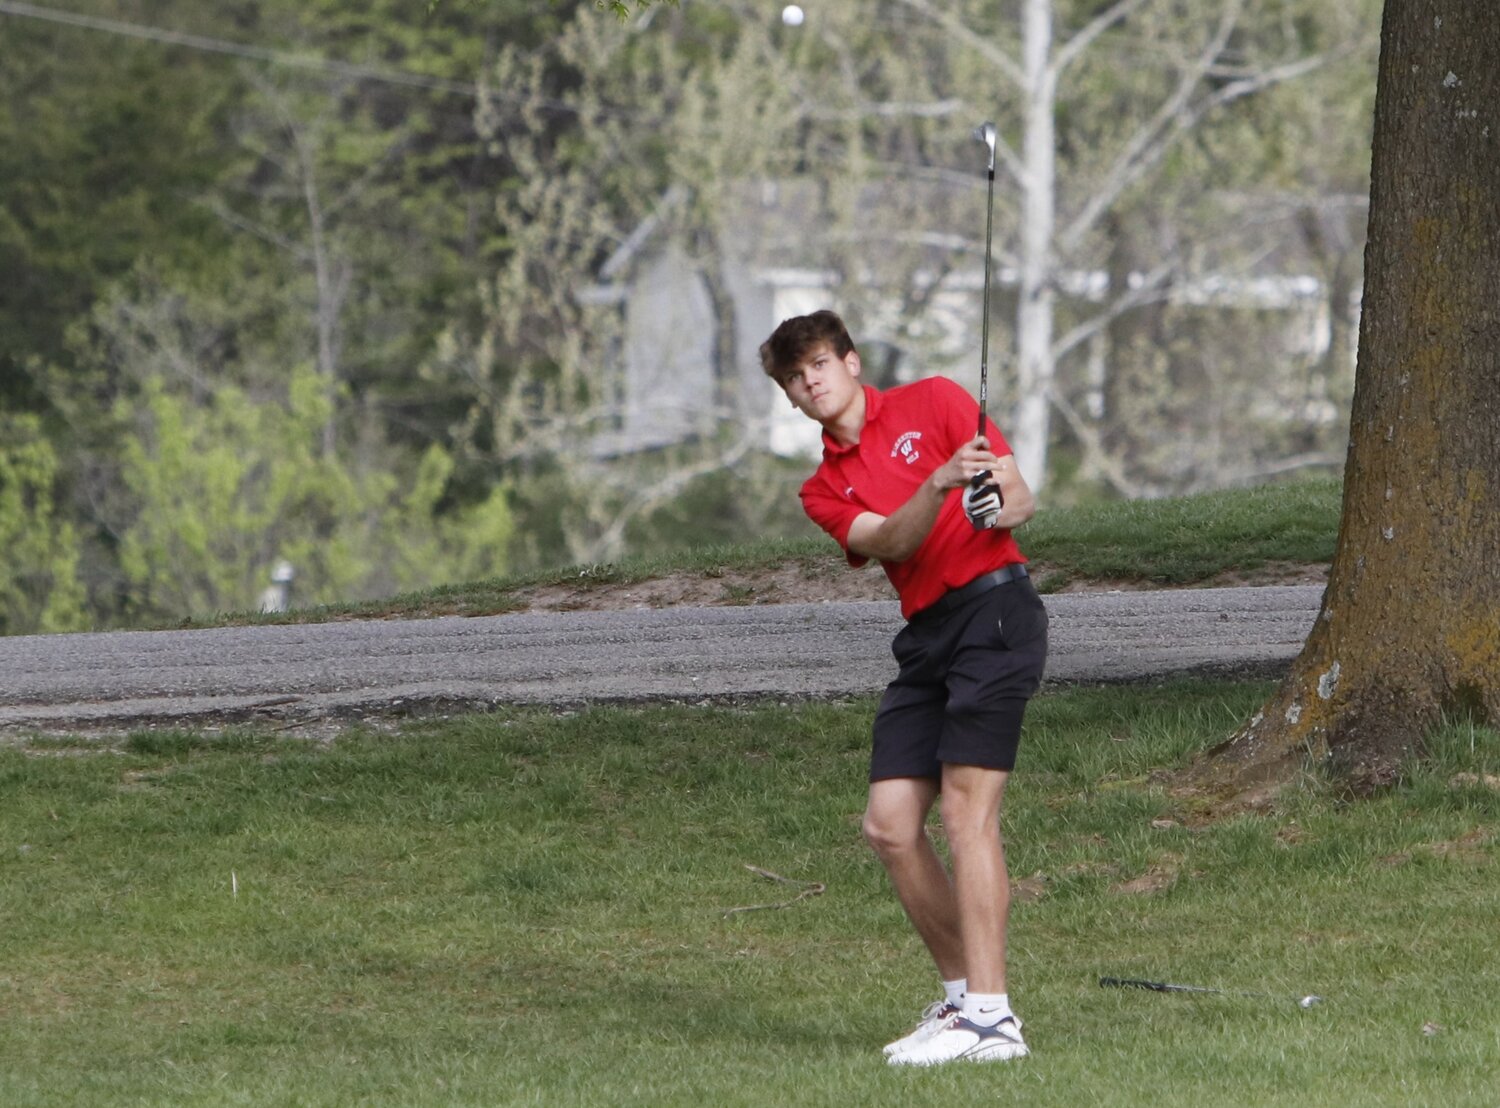 Maison Rader hits an approach shot during Tuesday's golf meet against St. Charles West.